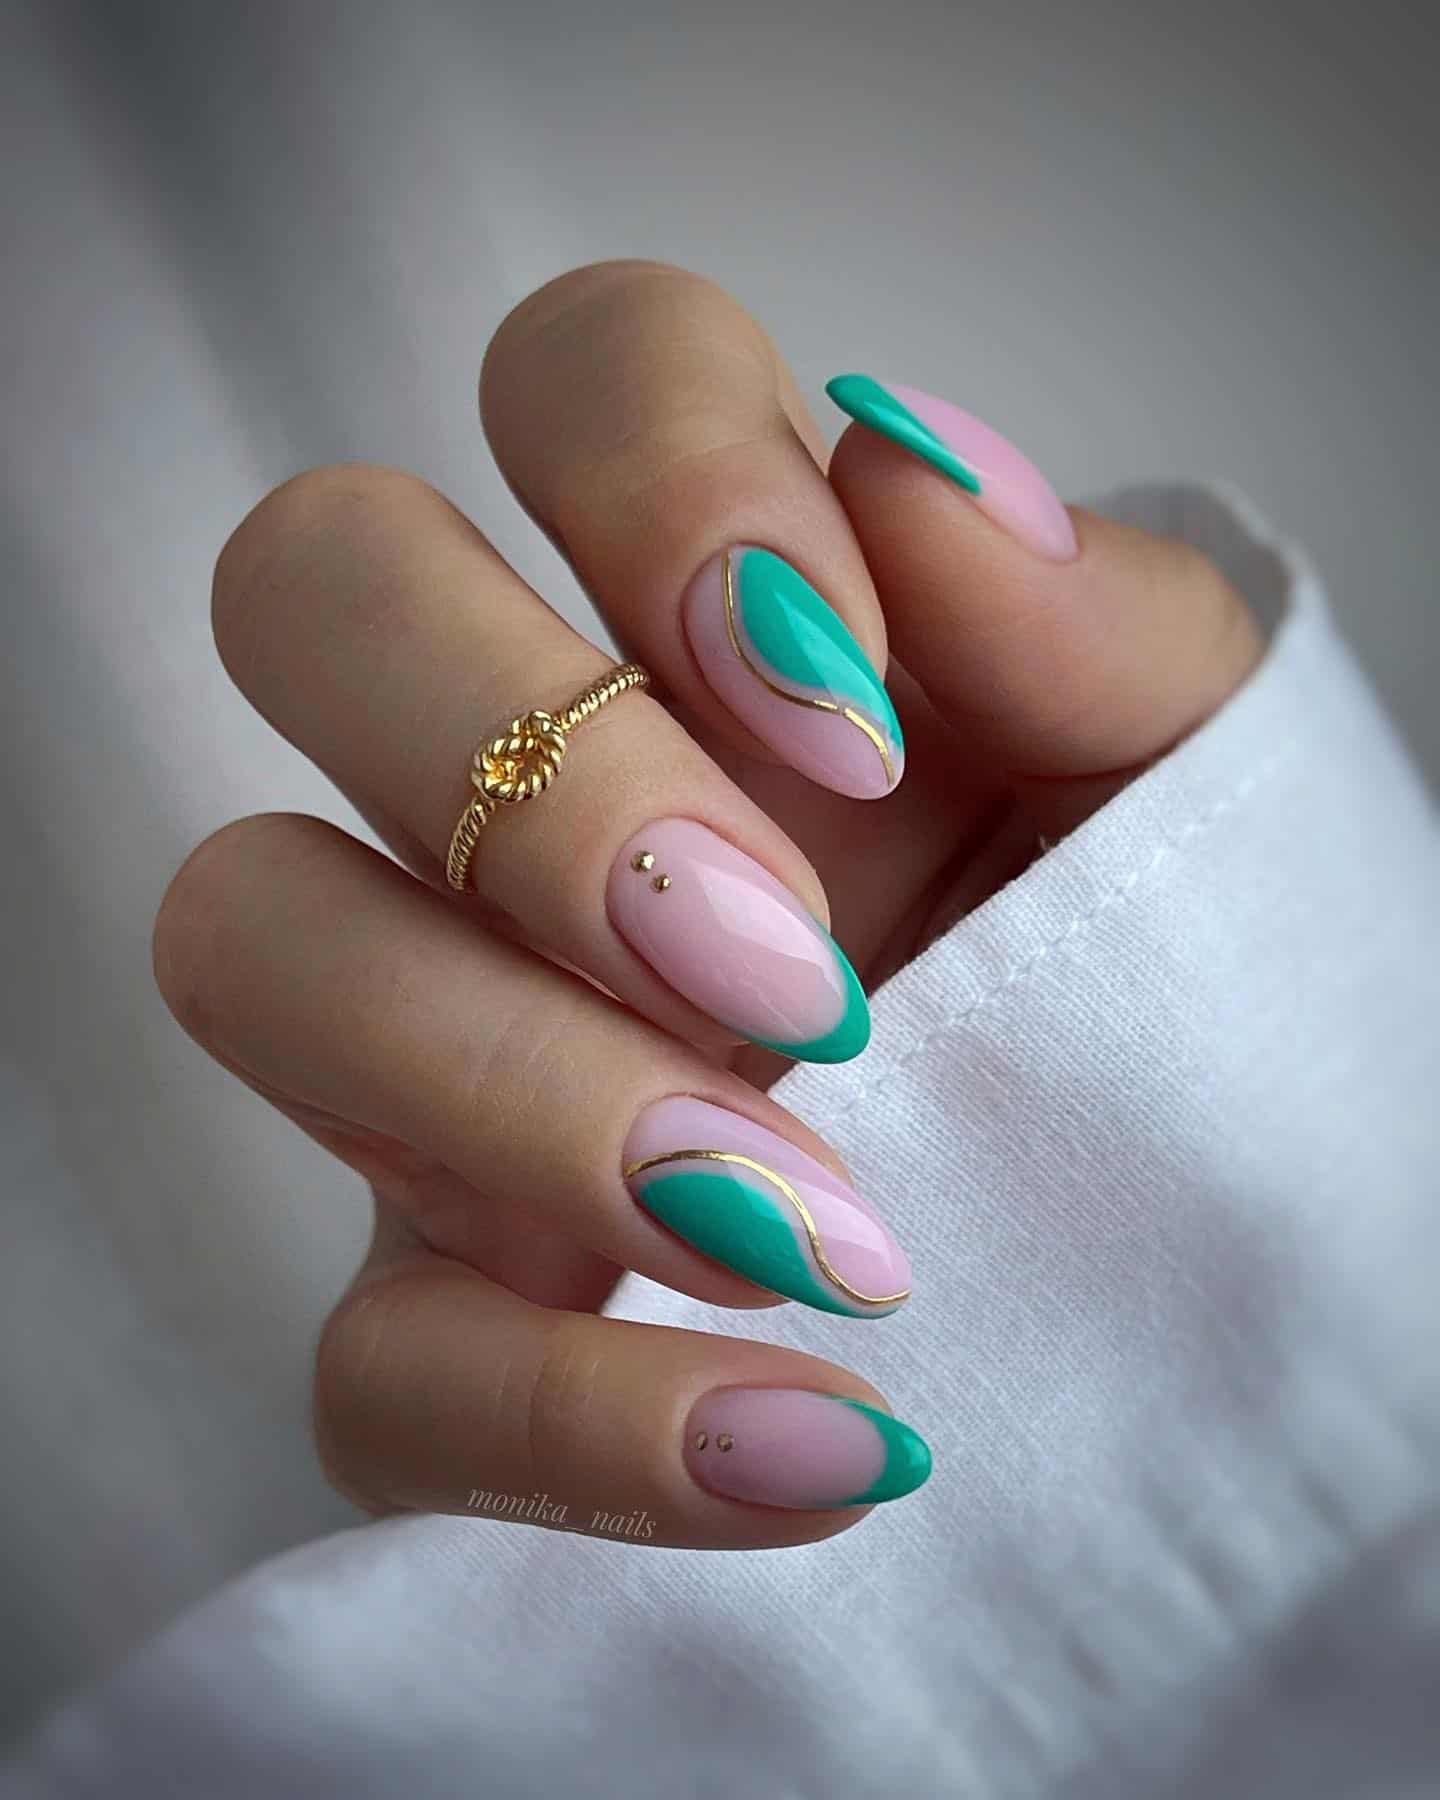 A hand with medium almond nails painted a light pink with green wave accents, green French tips, and gold line details